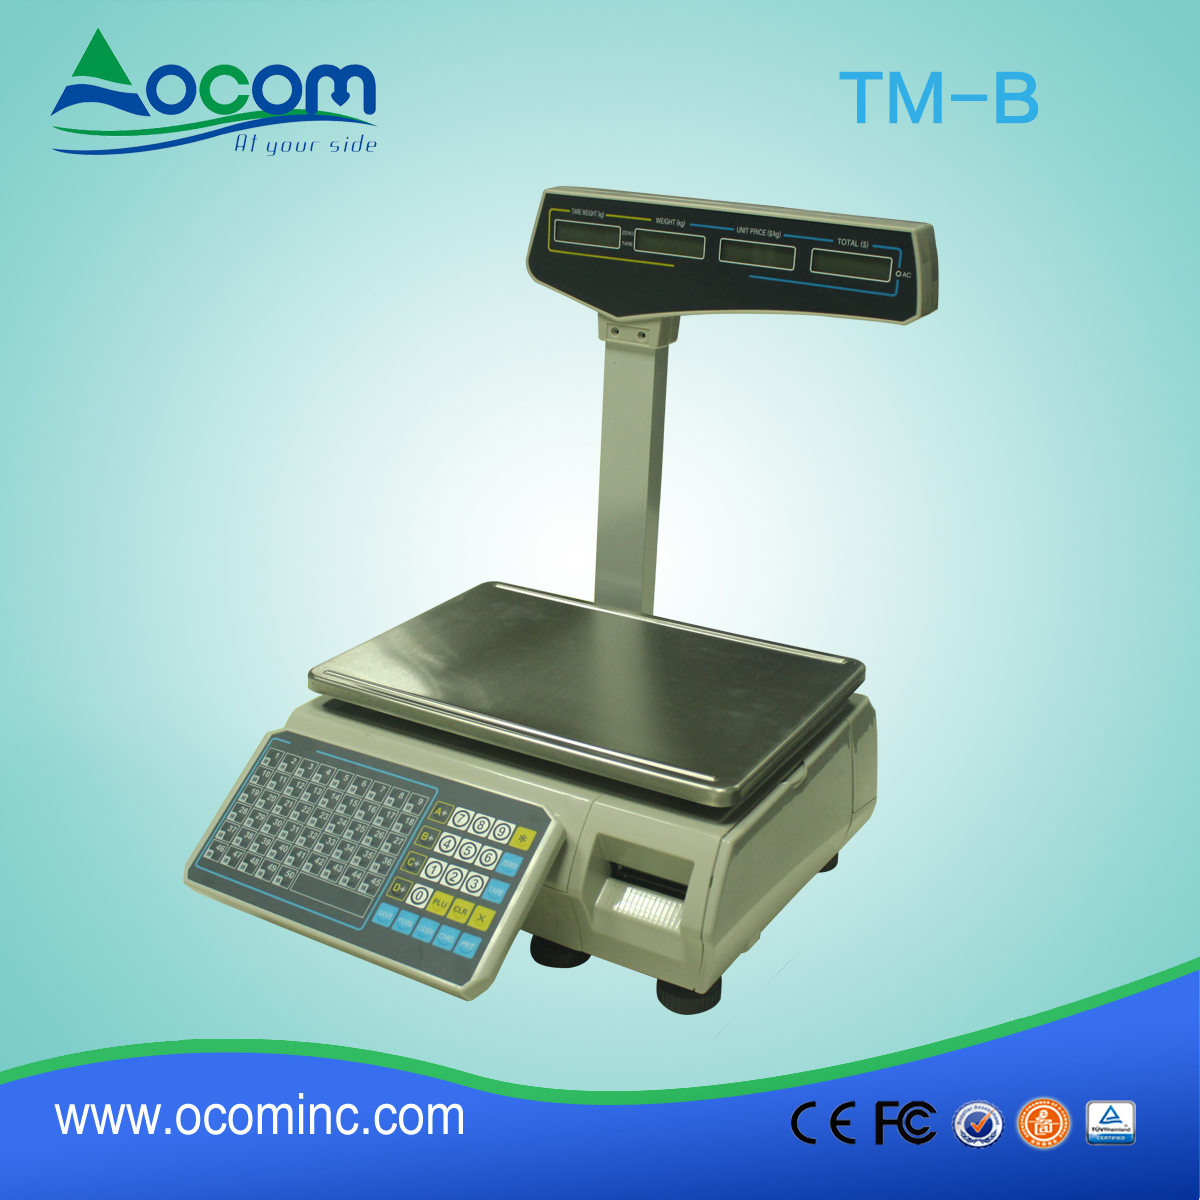 (TM-B) Low cost supermaket thermal barcode weighing scales